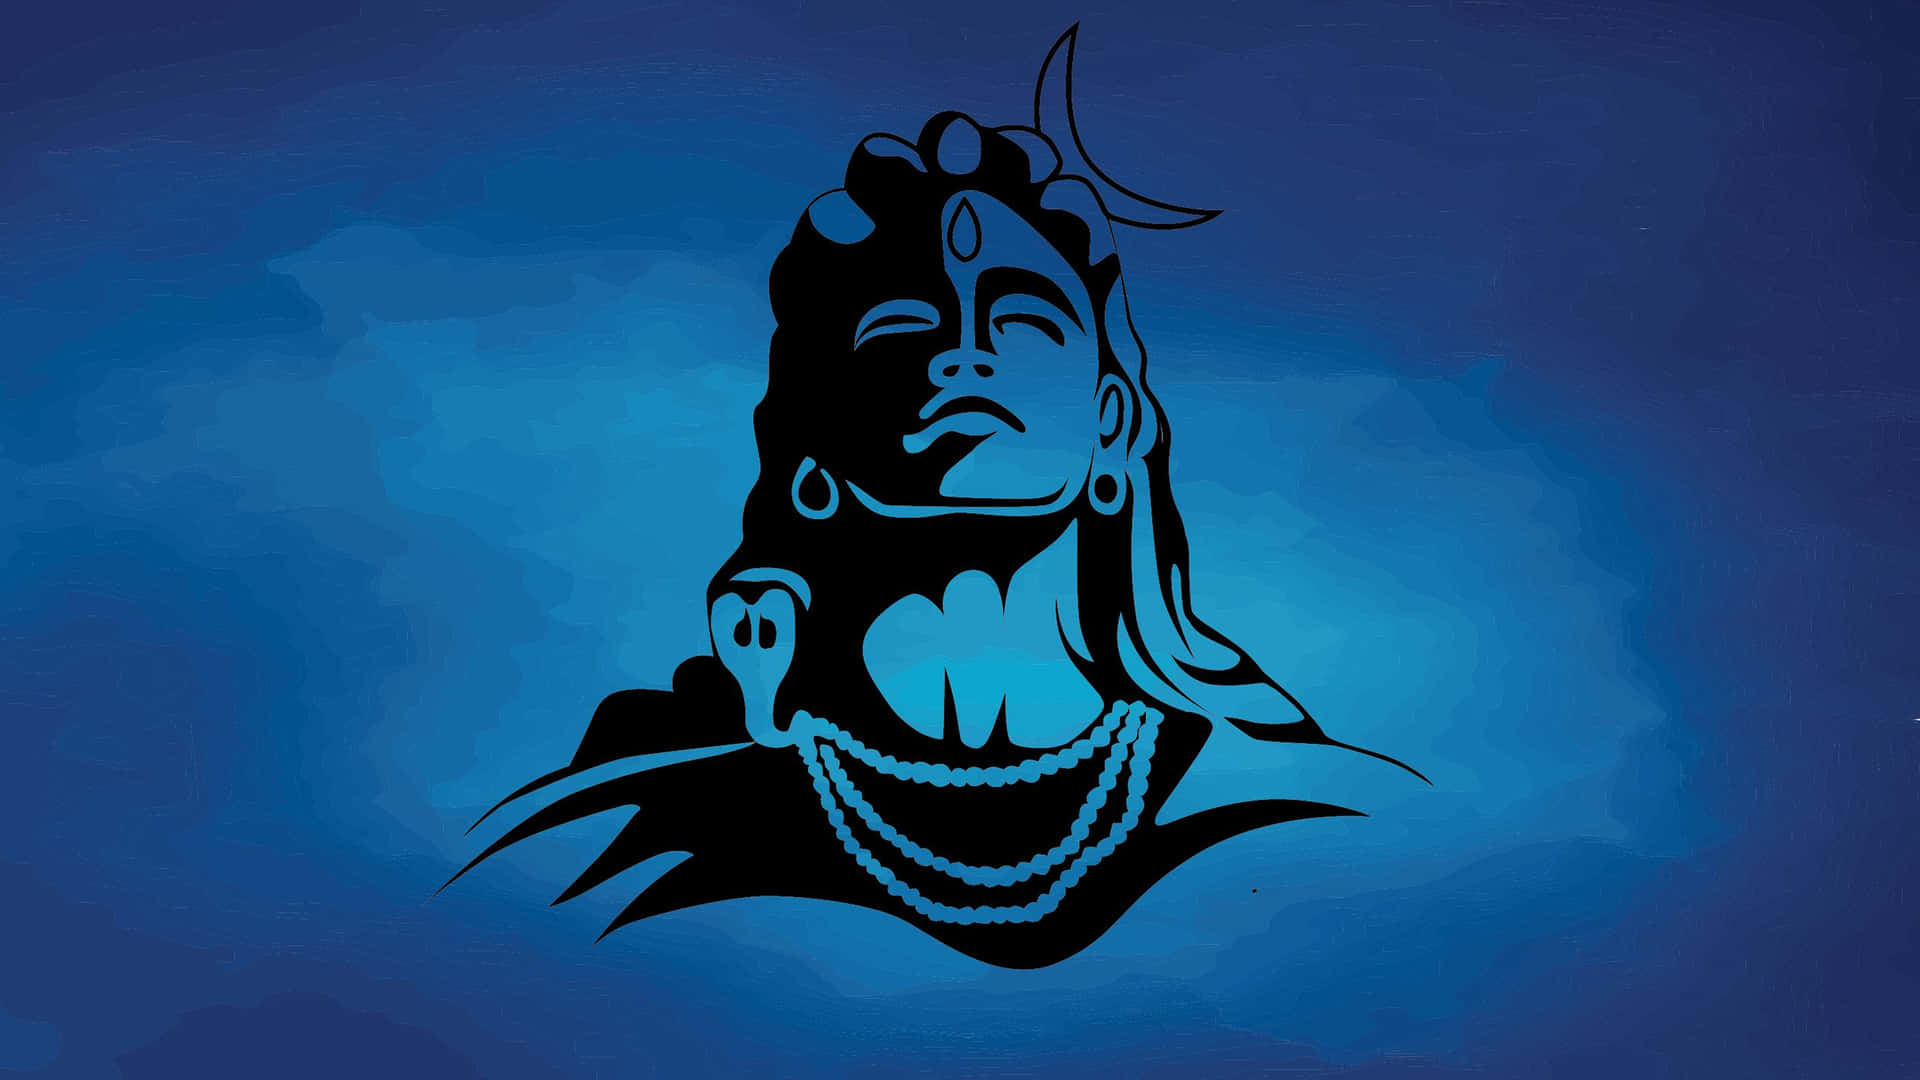 A Silhouette Of Lord Shiva On A Blue Background